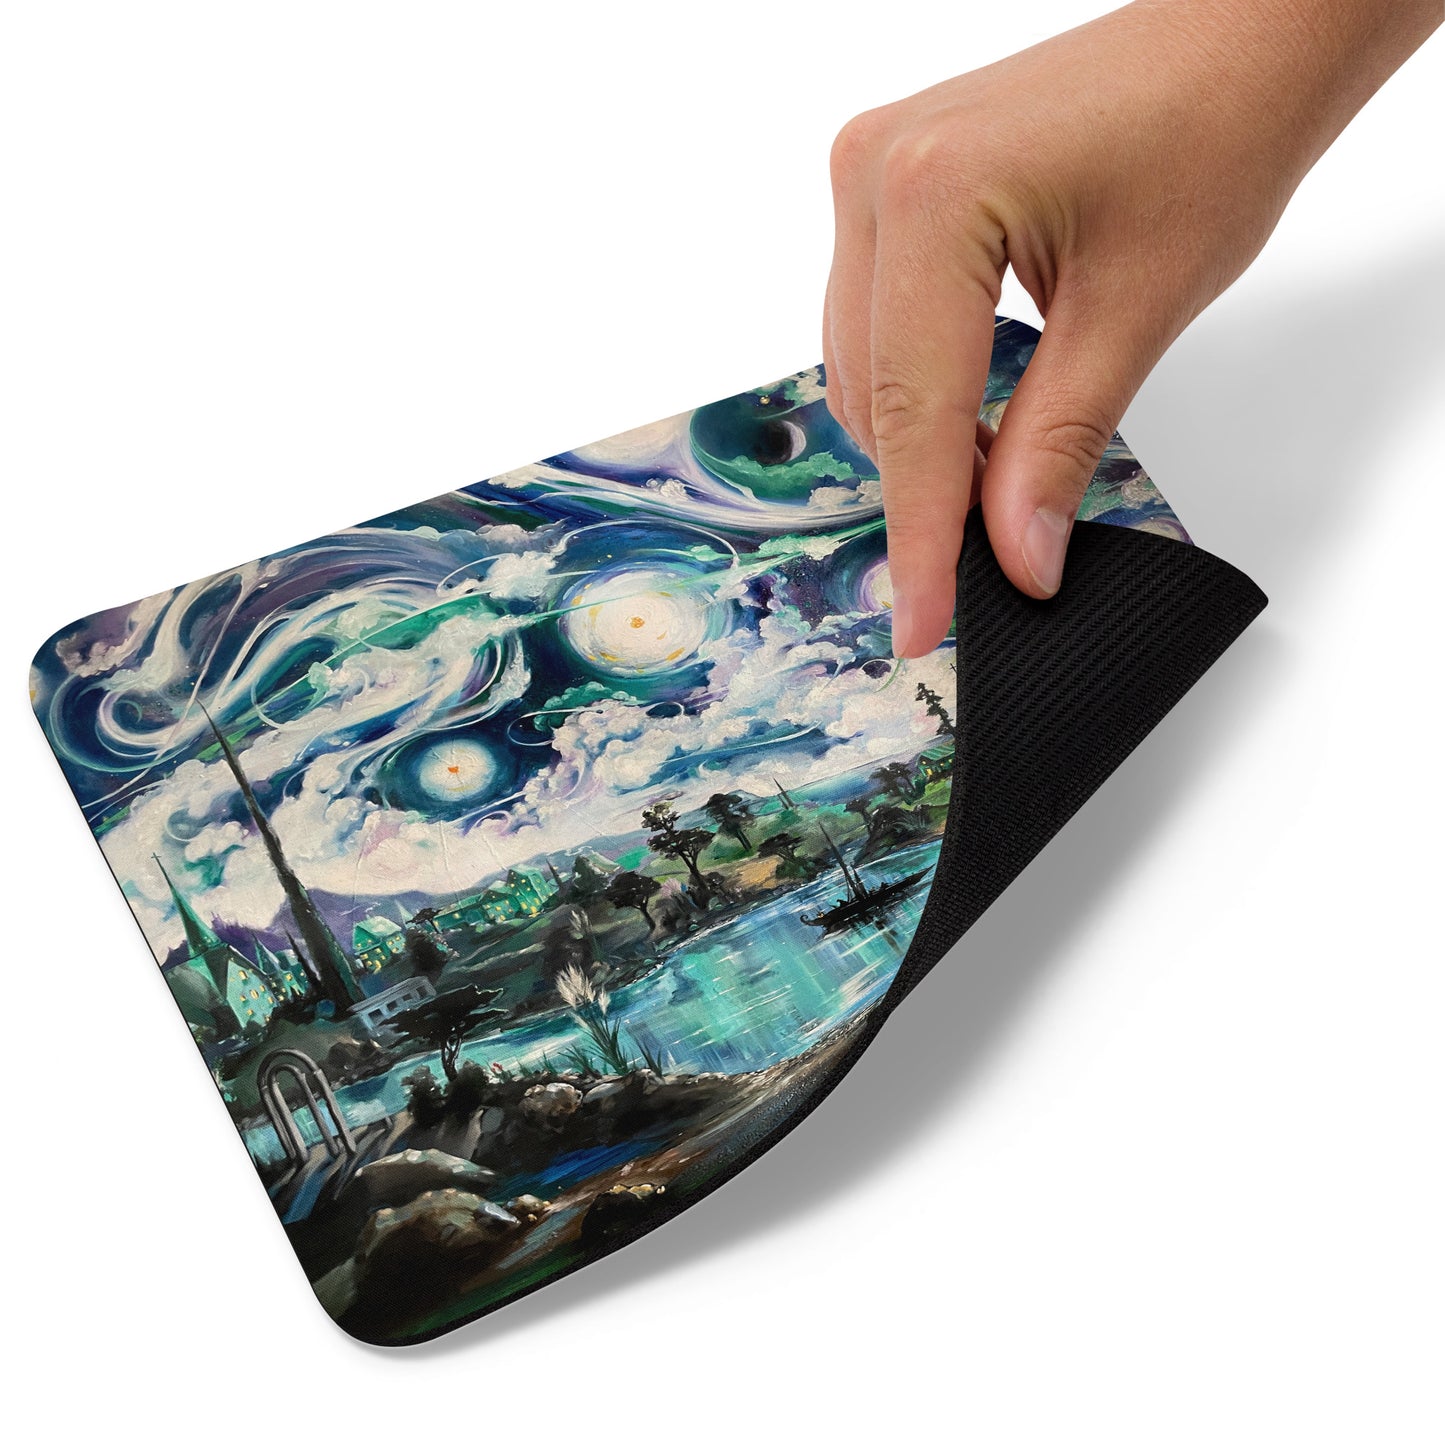 Starry Lagoon Mouse pad